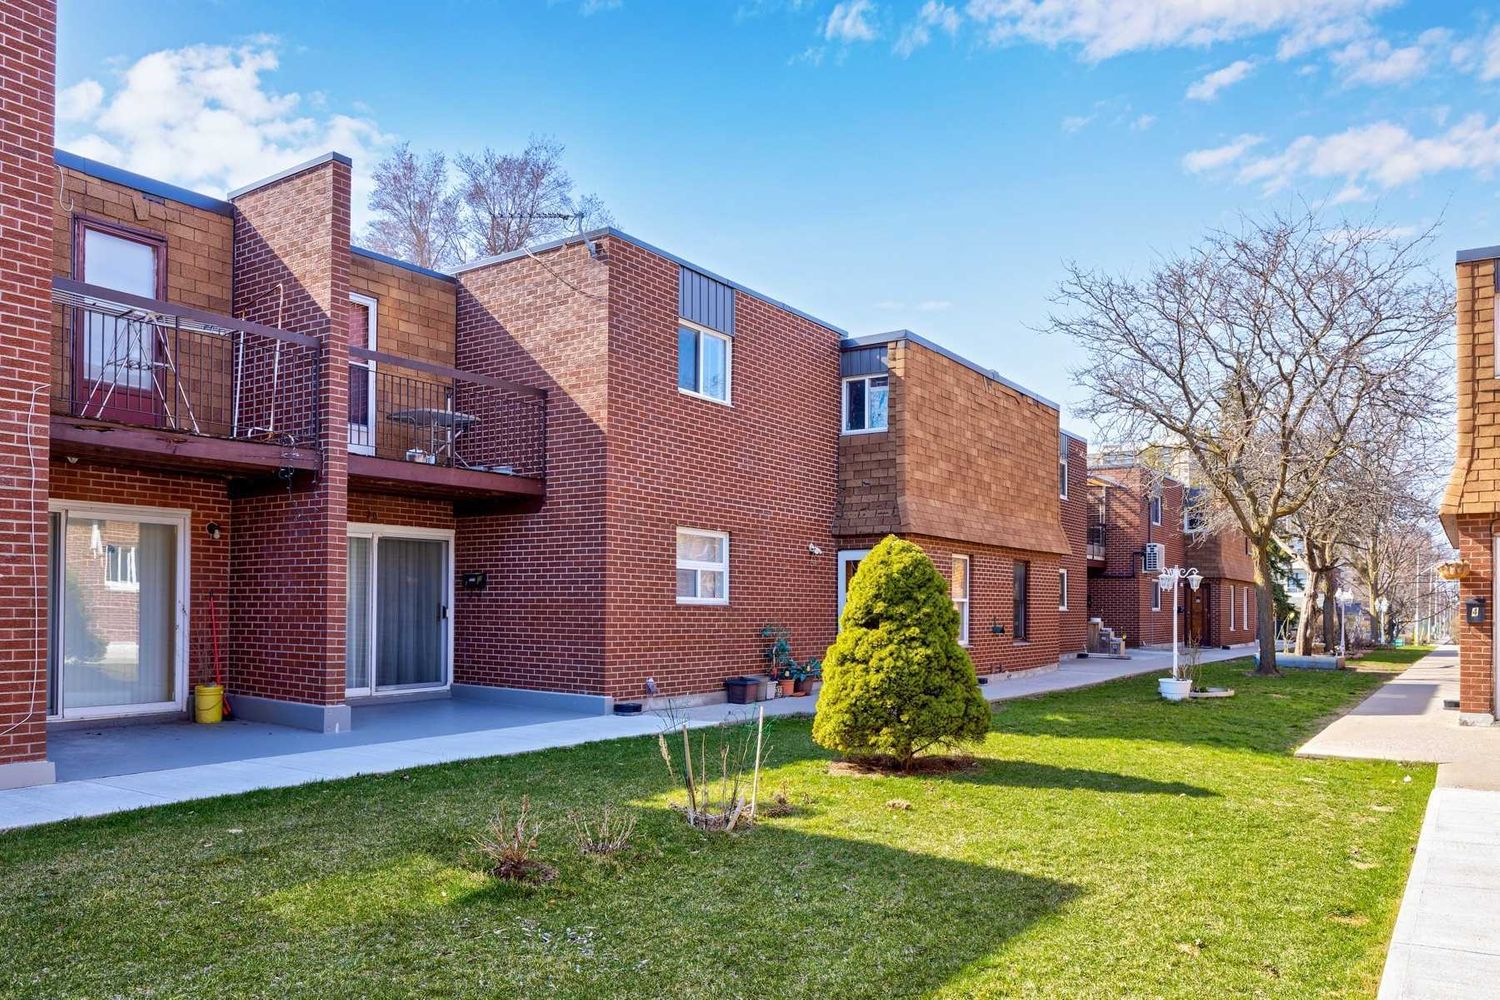 50 Coleman Avenue. 50 Coleman Avenue Townhomes is located in  East End, Toronto - image #3 of 5